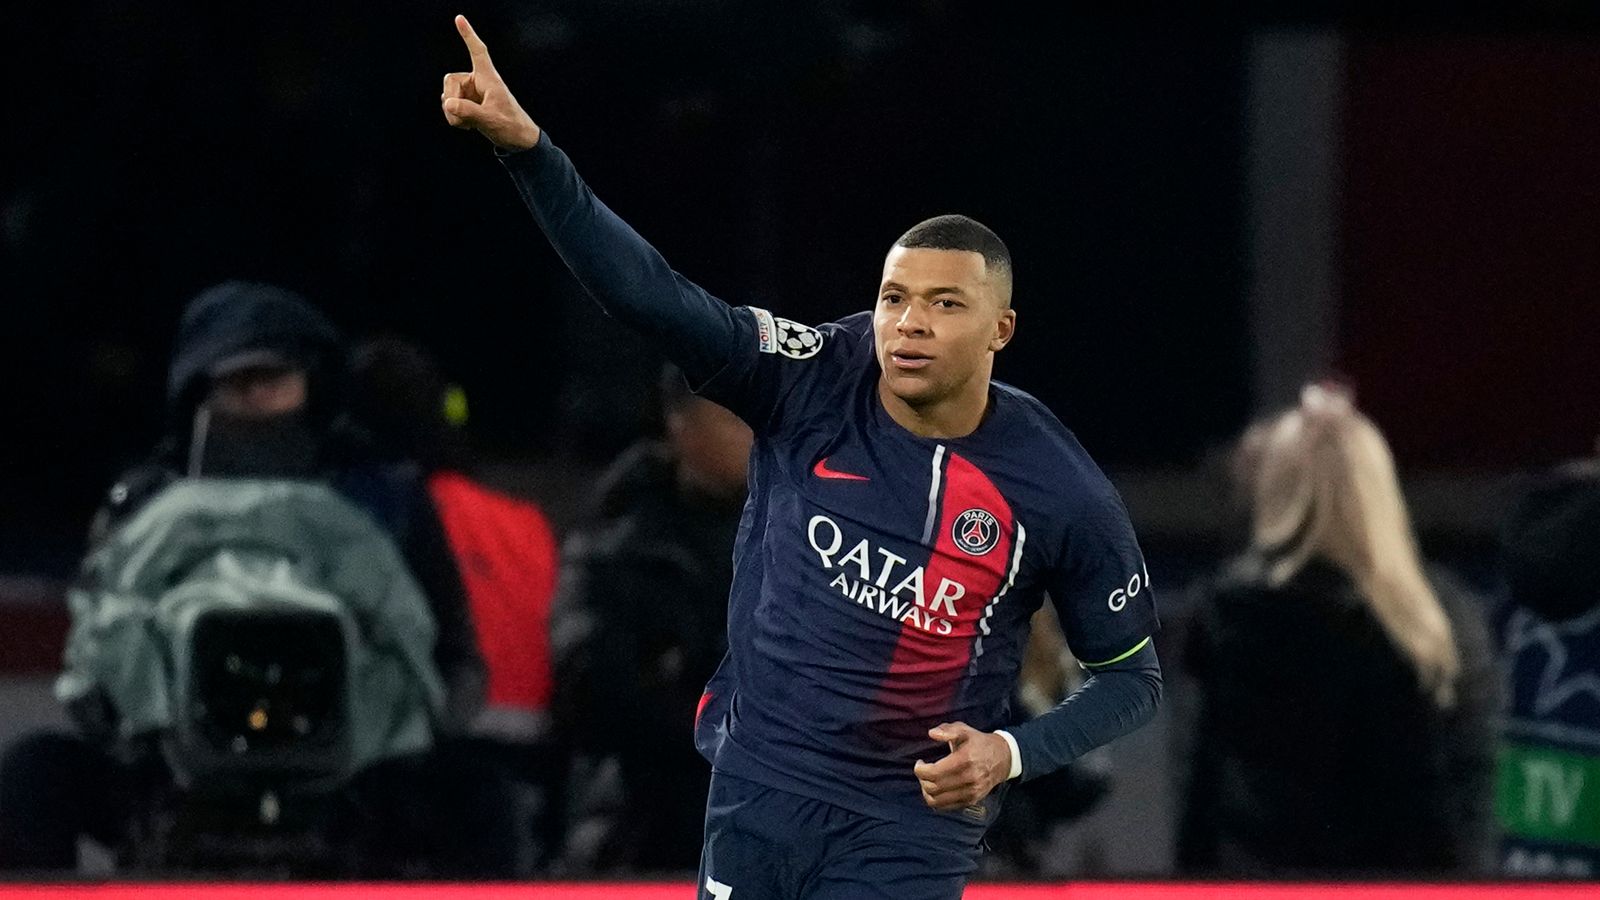 Mbappe To PSG: "I Will Leave At The End Of This Season"